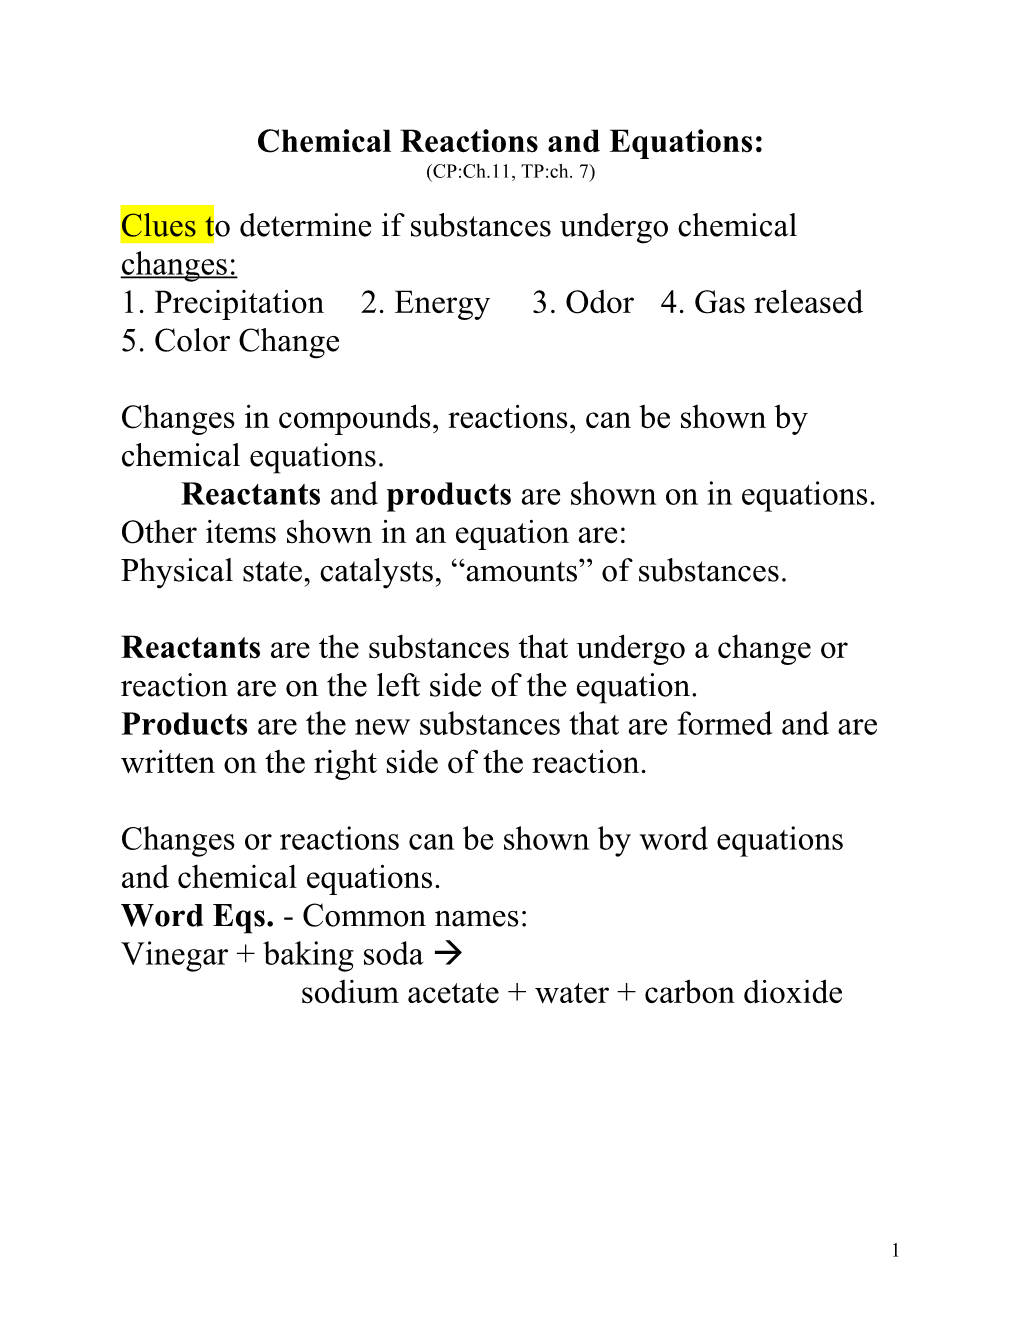 Chemical Reactions and Equations: (CP:Ch